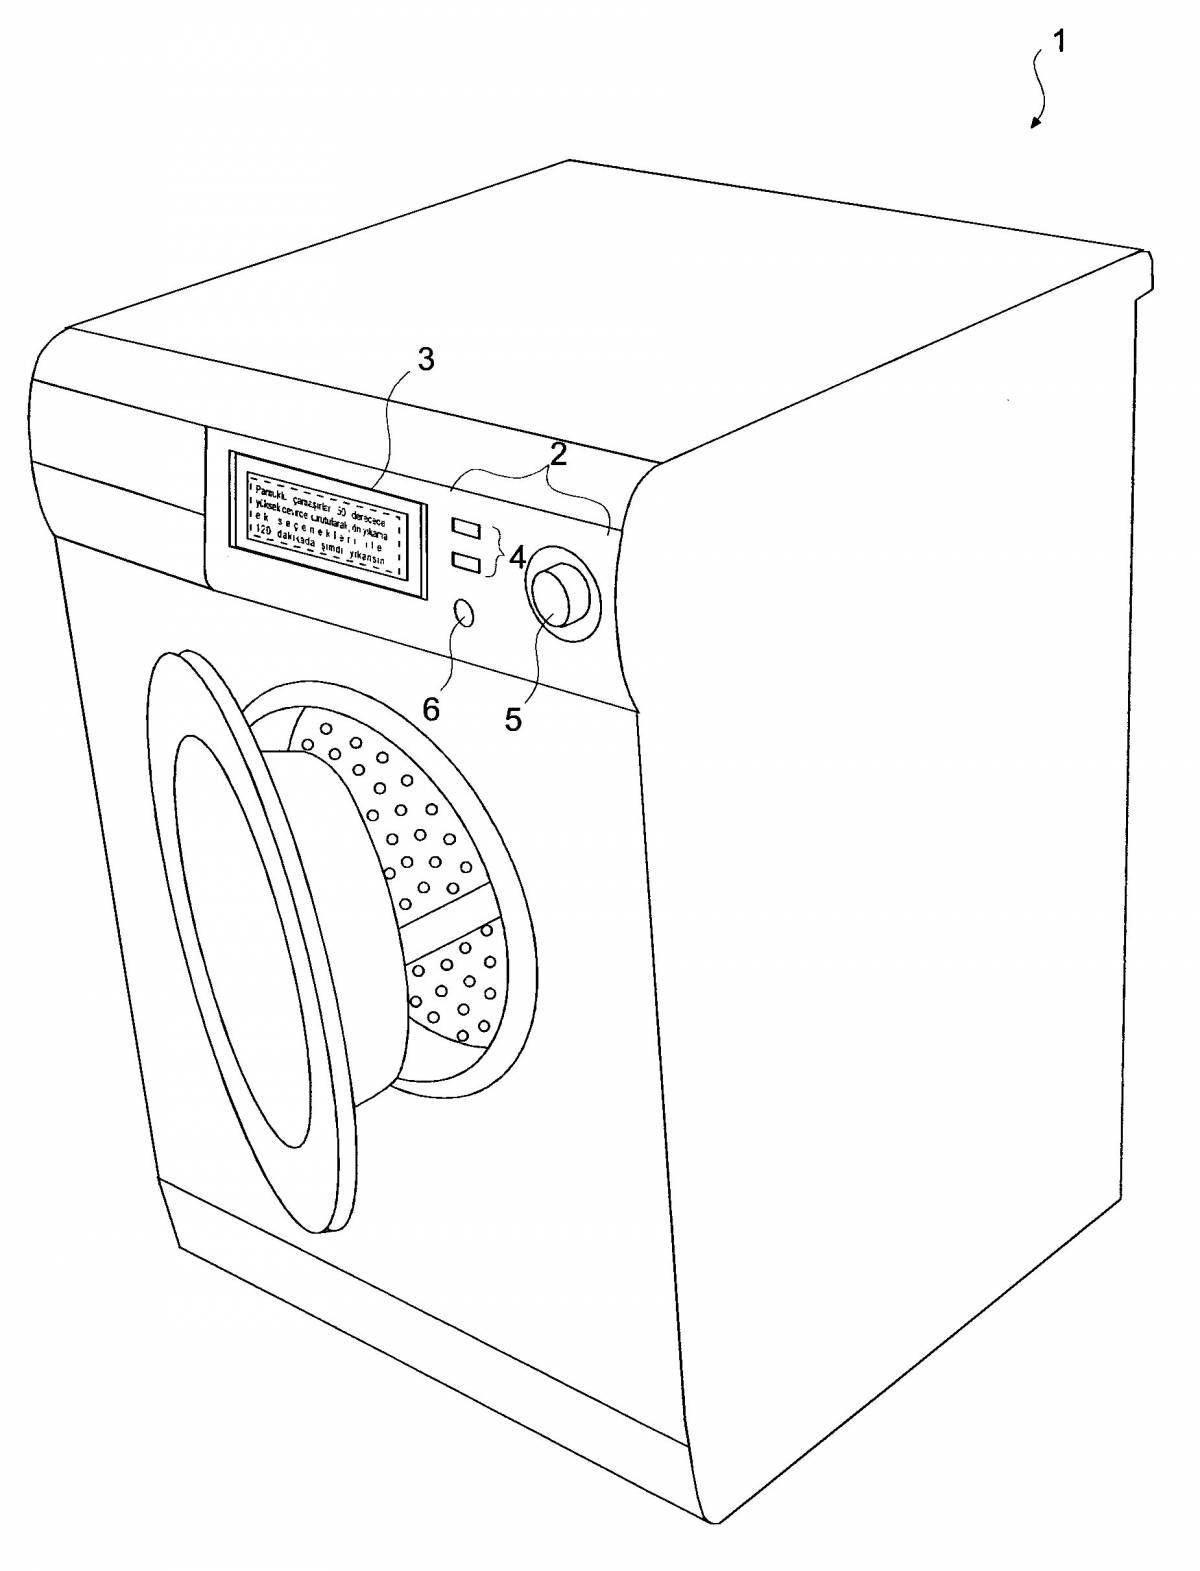 Coloring page of washing machine for toddlers